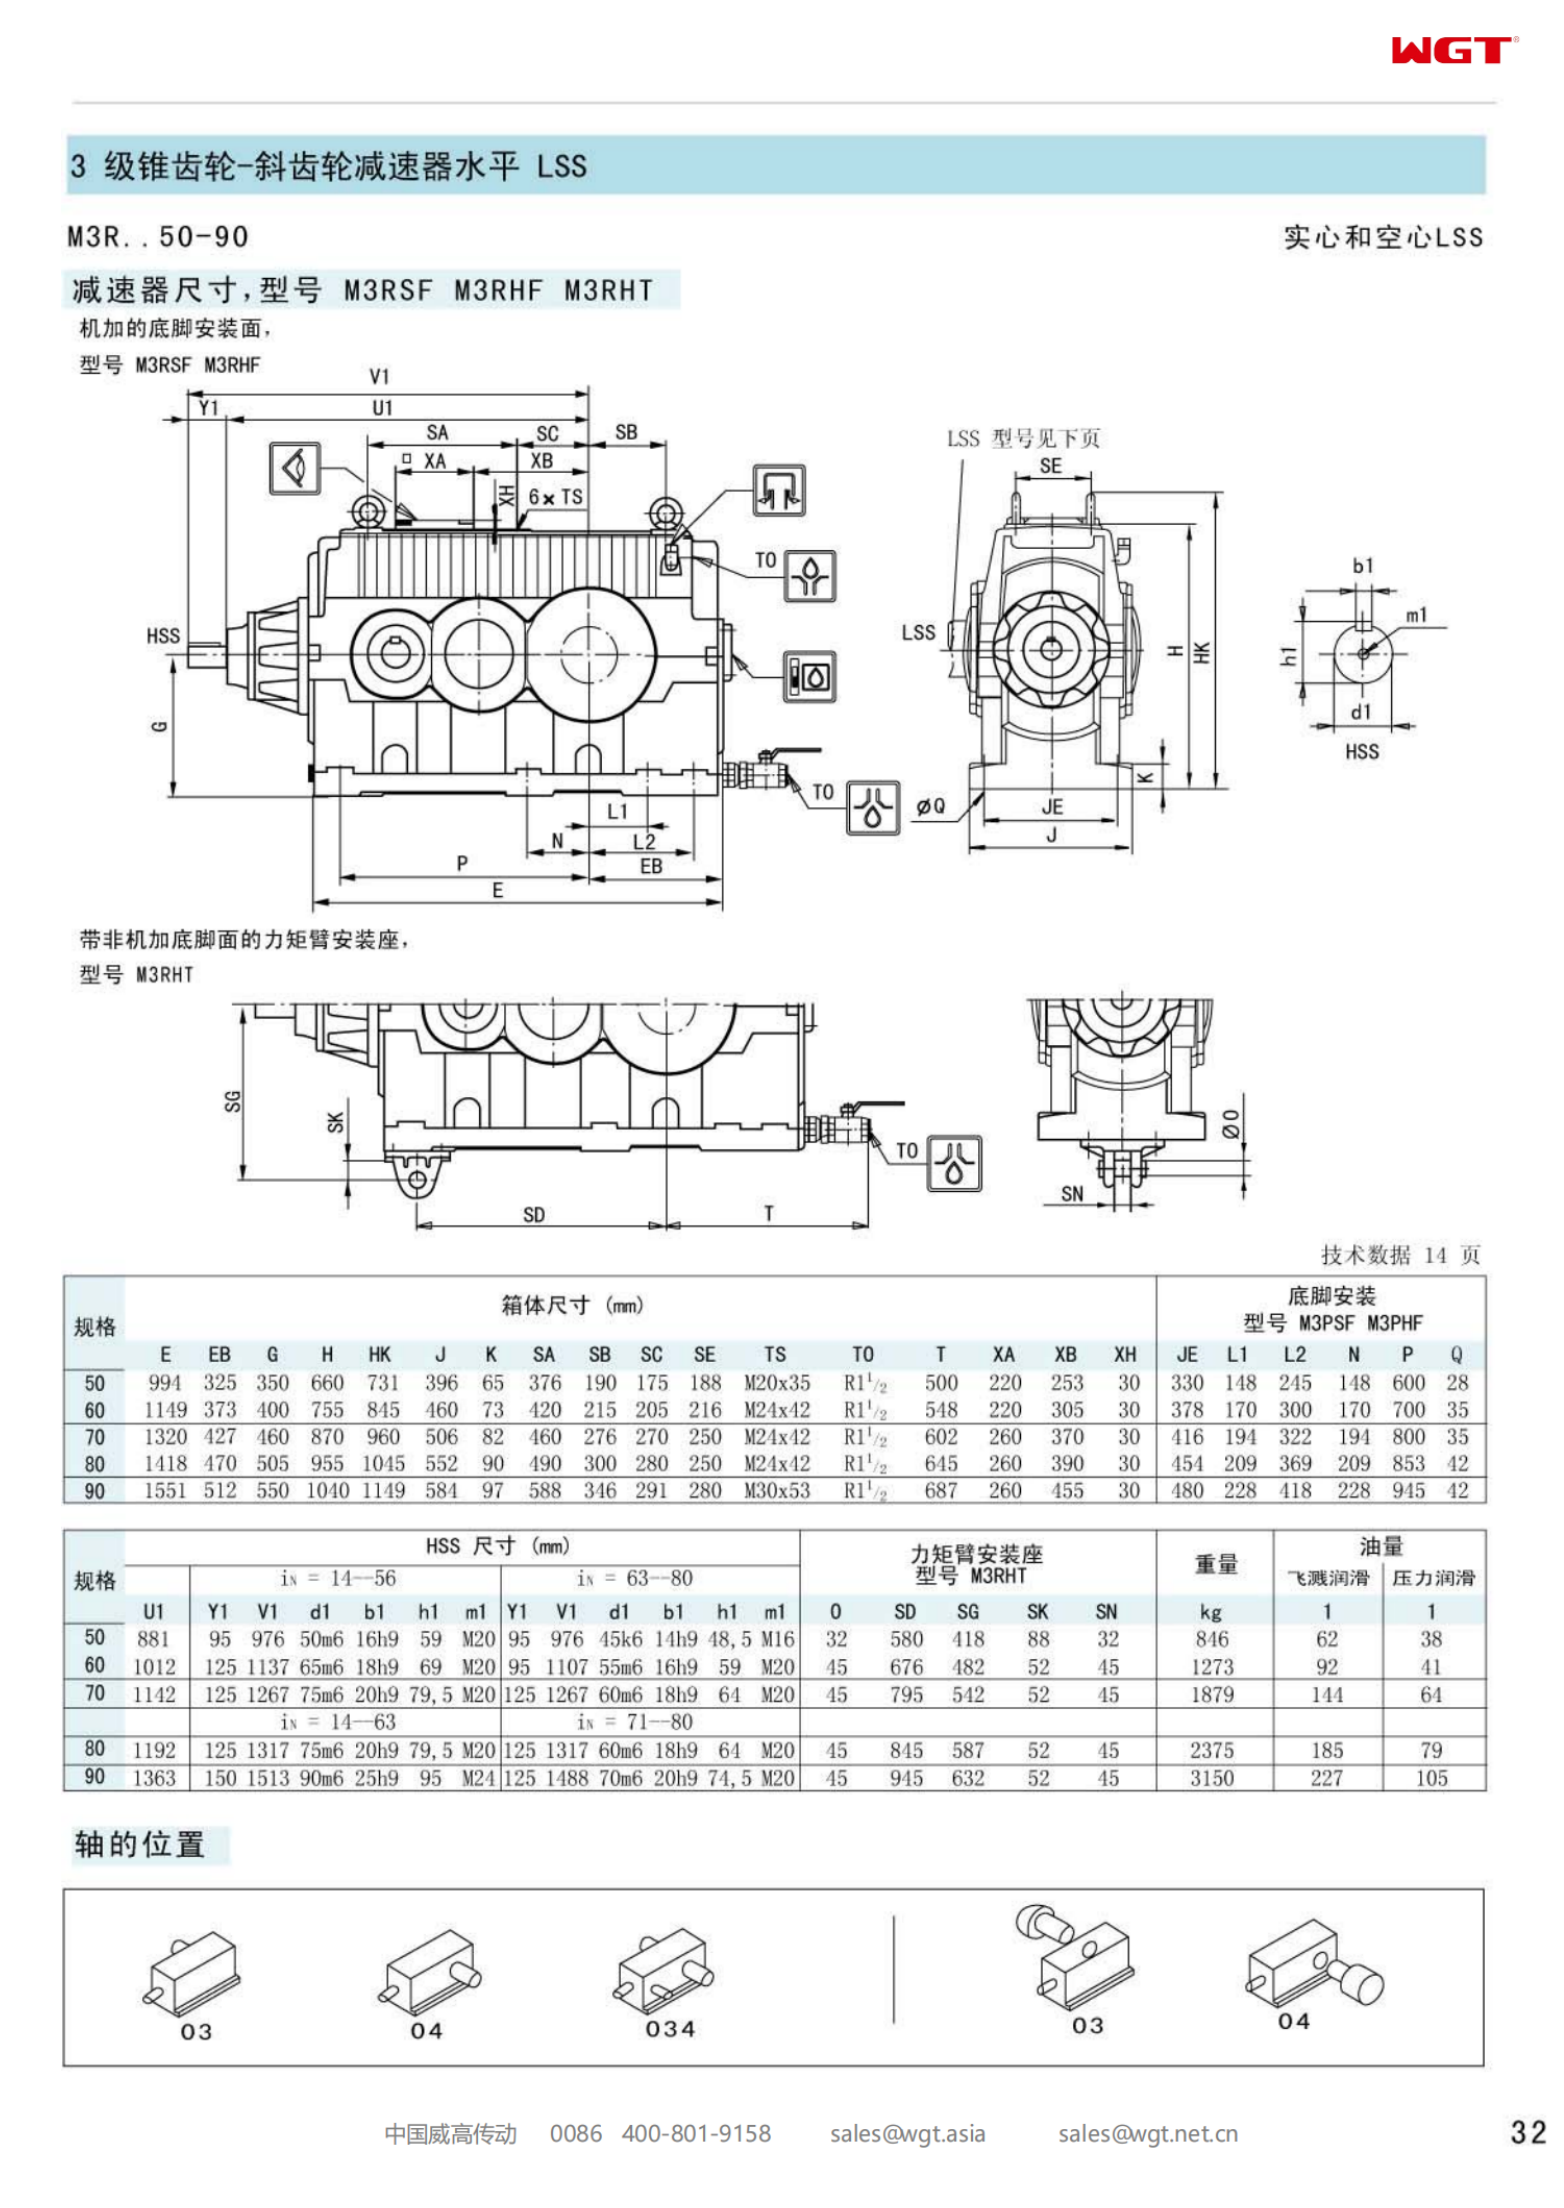 M3RSF80 Replace_SEW_M_Series Gearbox